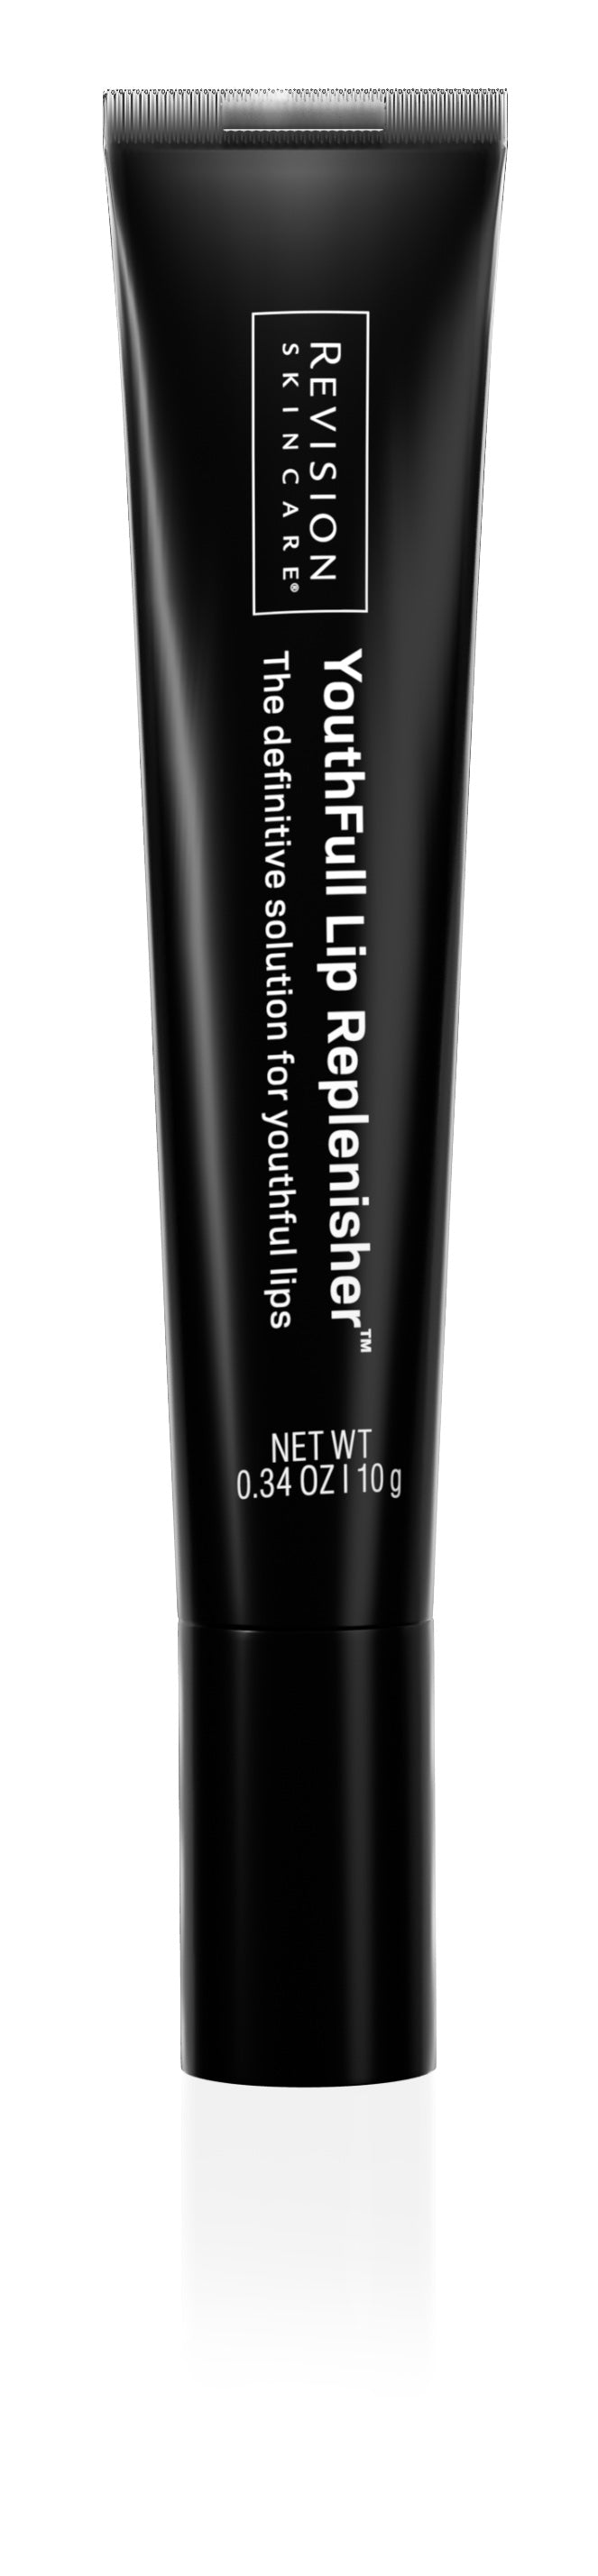 Revision | Youthful Lip Replenisher (9.4g)